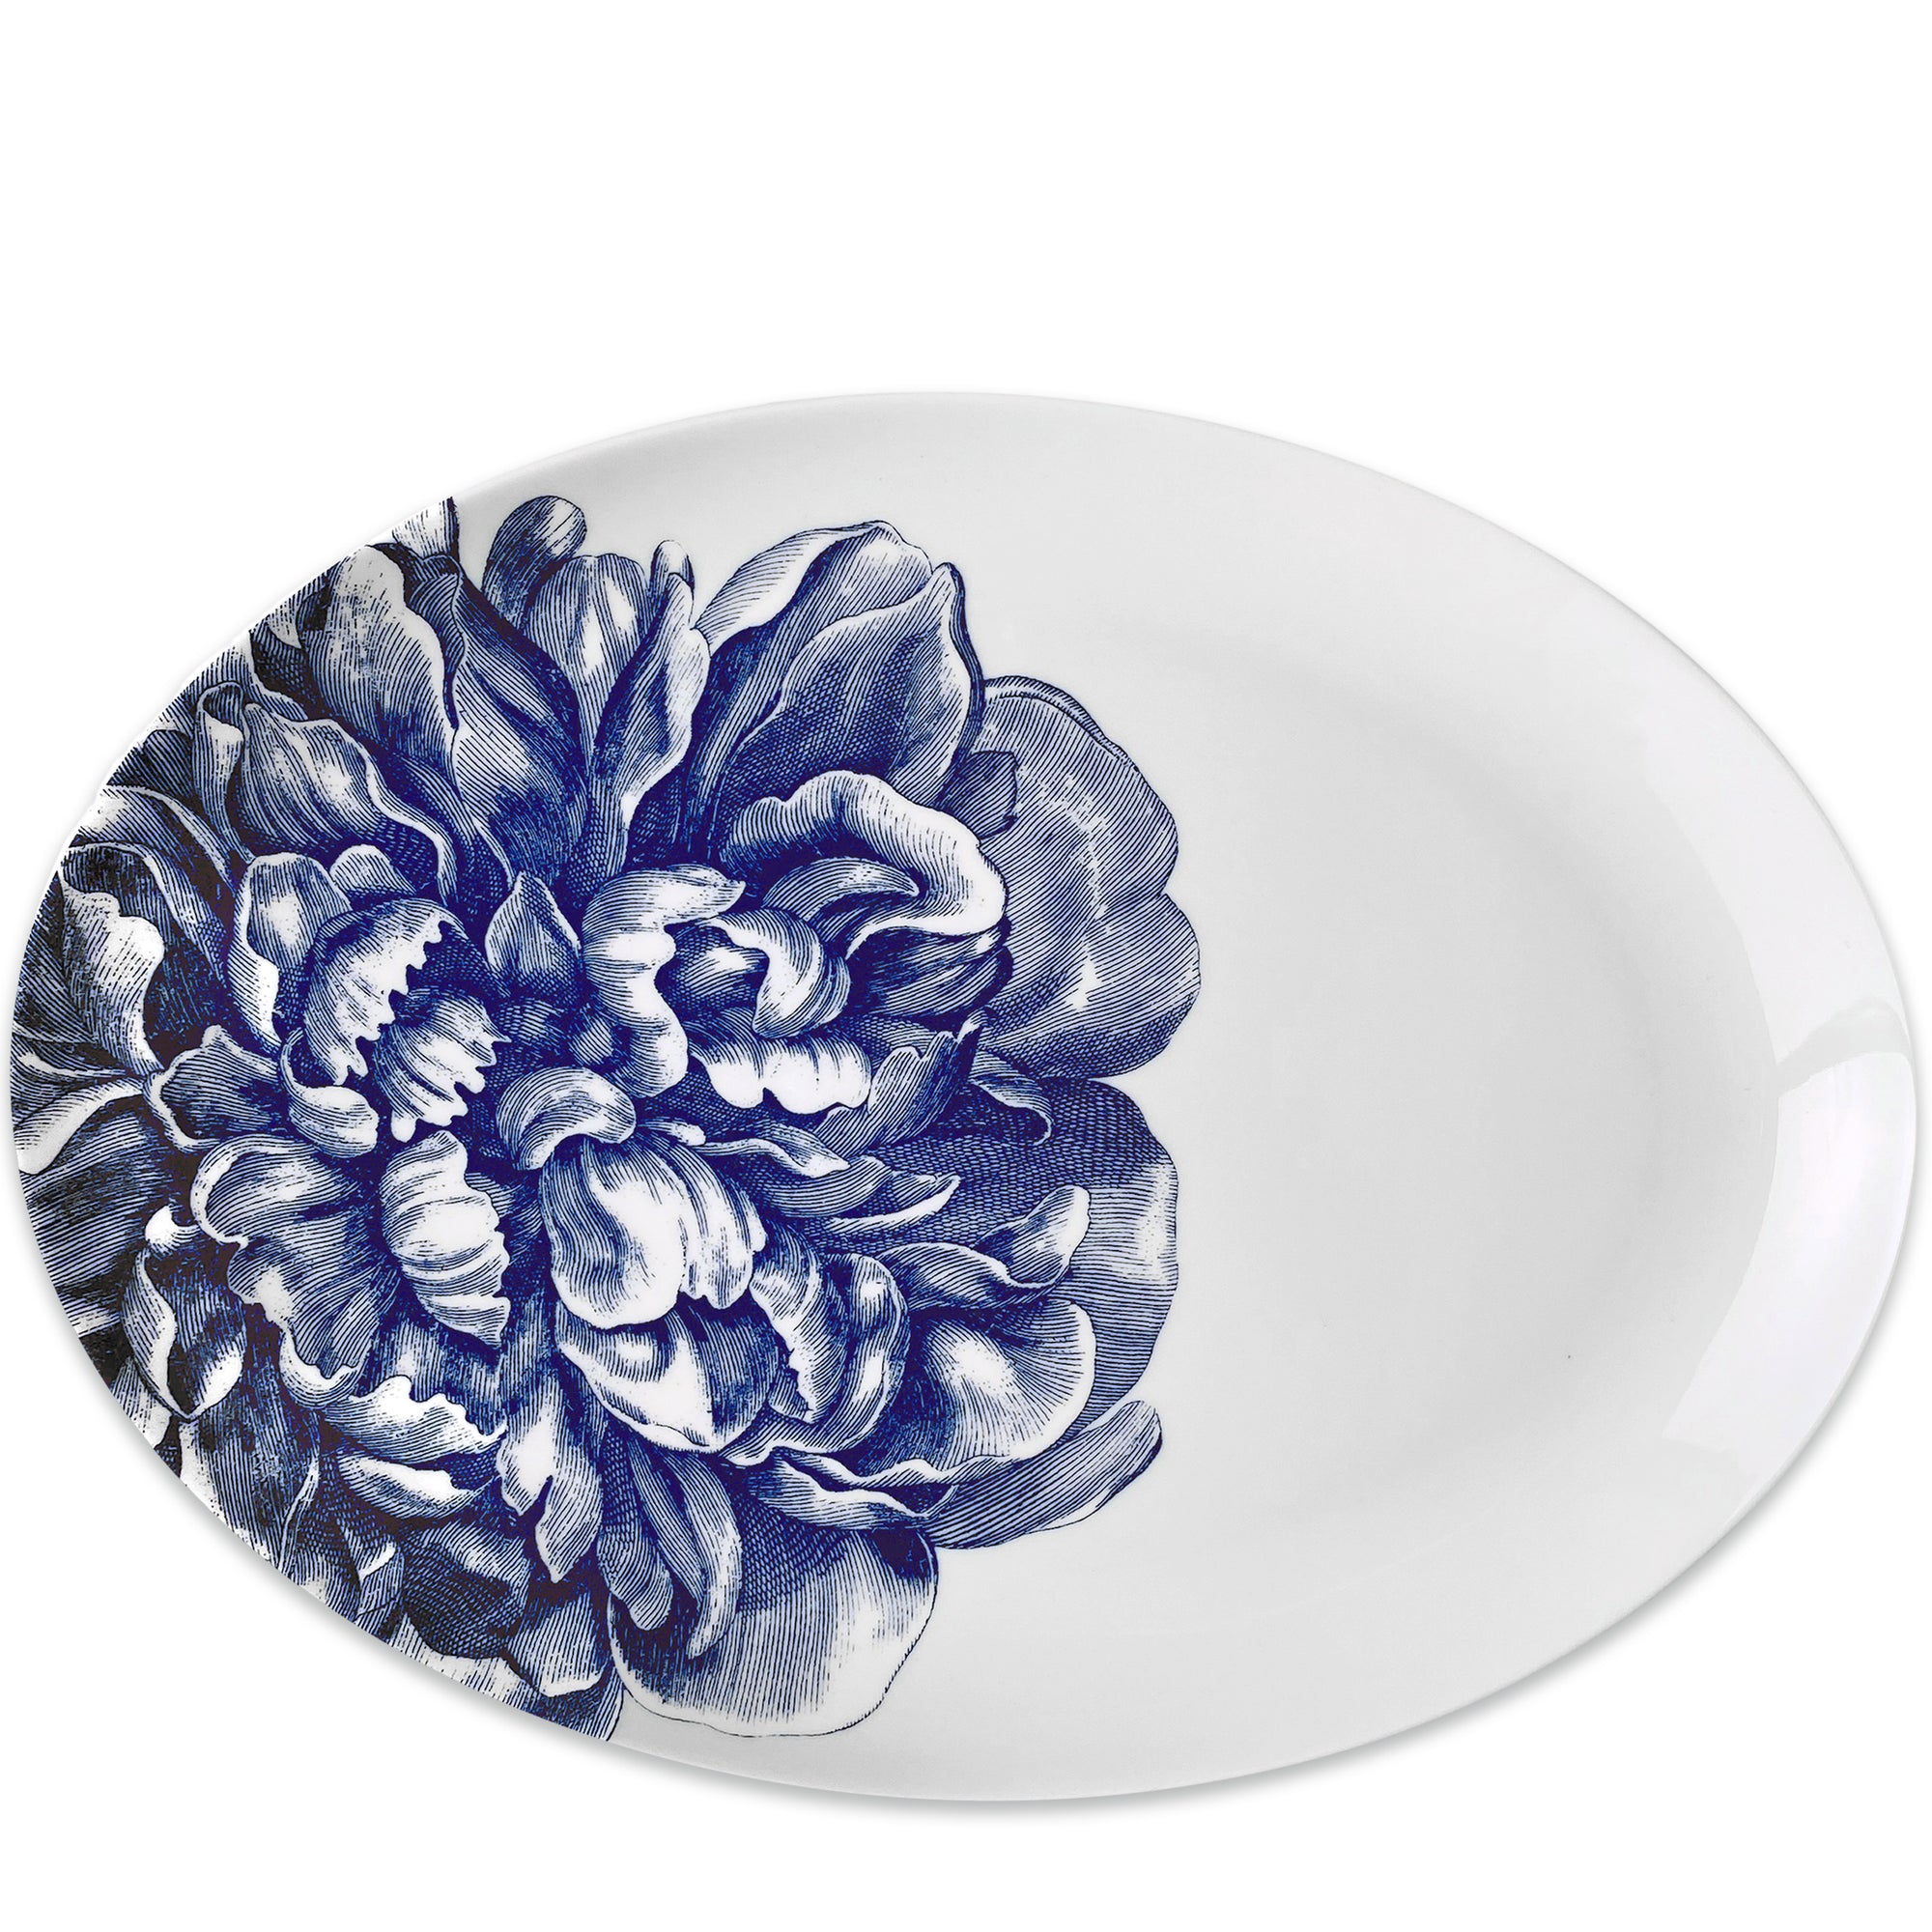 White oval porcelain Peony Medium Coupe Oval Platter with a detailed blue floral dinnerware pattern on one side by Caskata Artisanal Home.